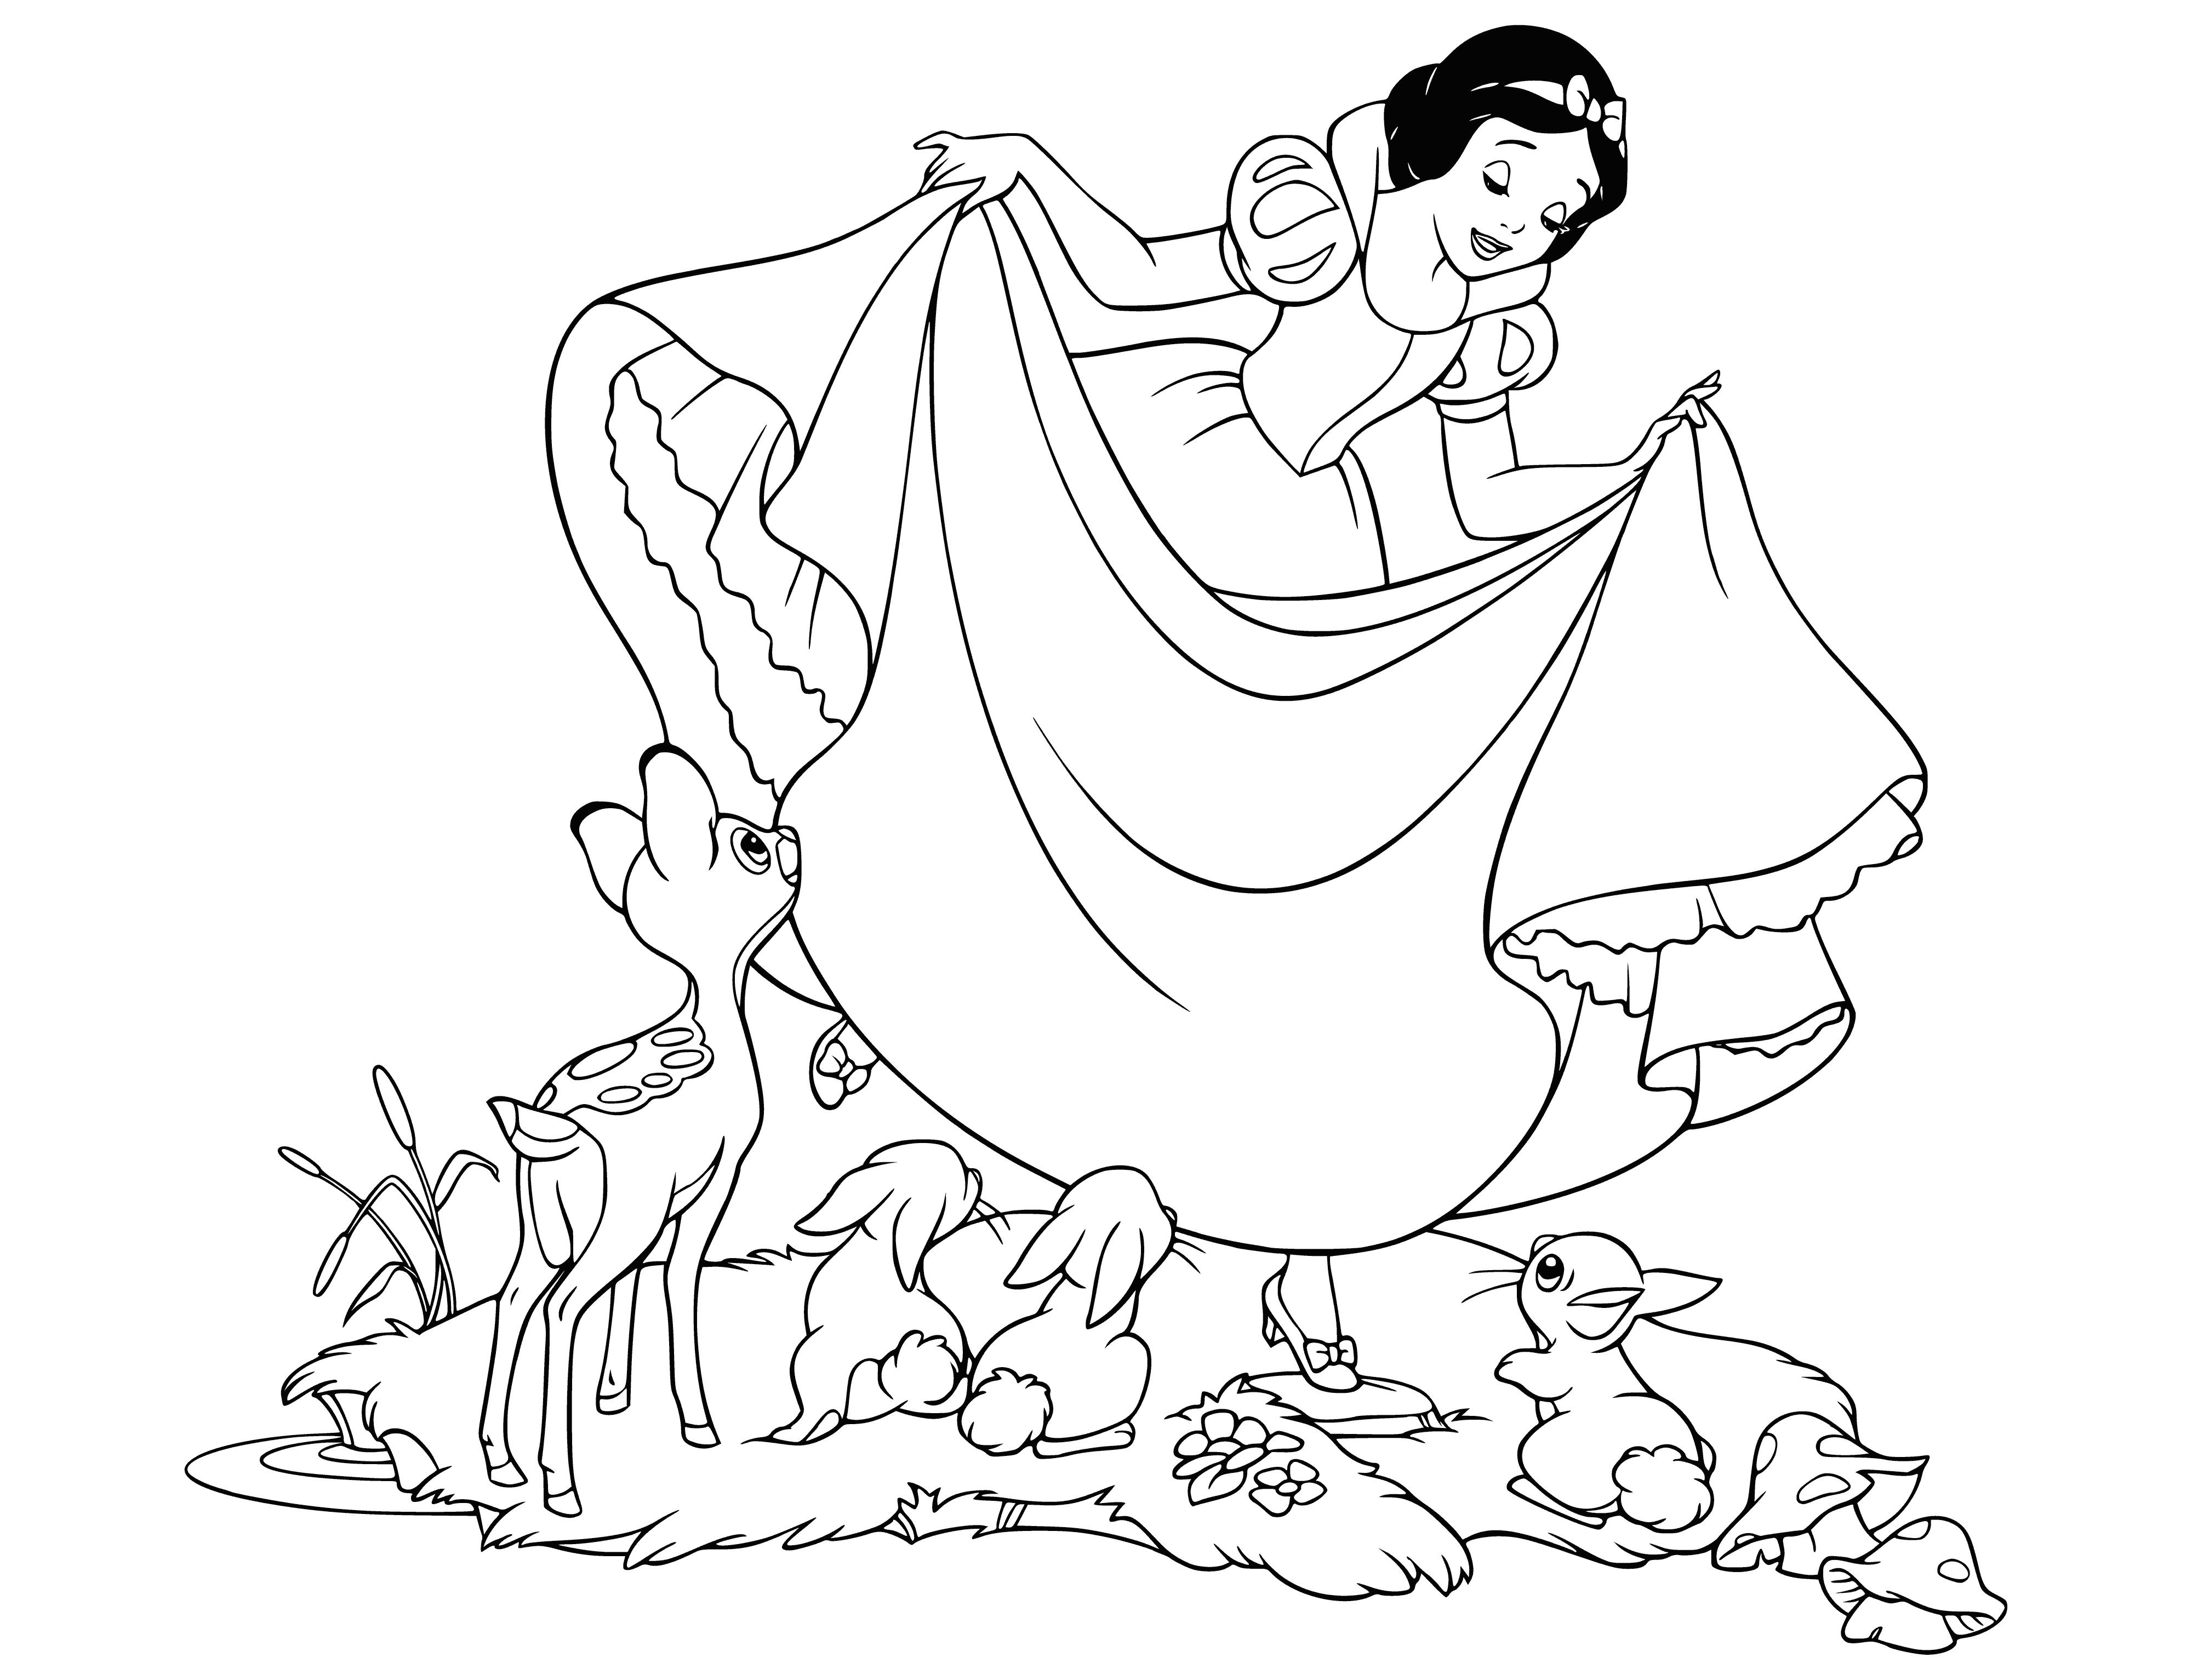 coloring page: Surrounded by woodland creatures, Snow White enjoys a magical atmosphere in this delightful scene inspired by Disney's first Princess film. Admiring her are a deer, rabbit, owl, squirrel, bird, and chipmunk.